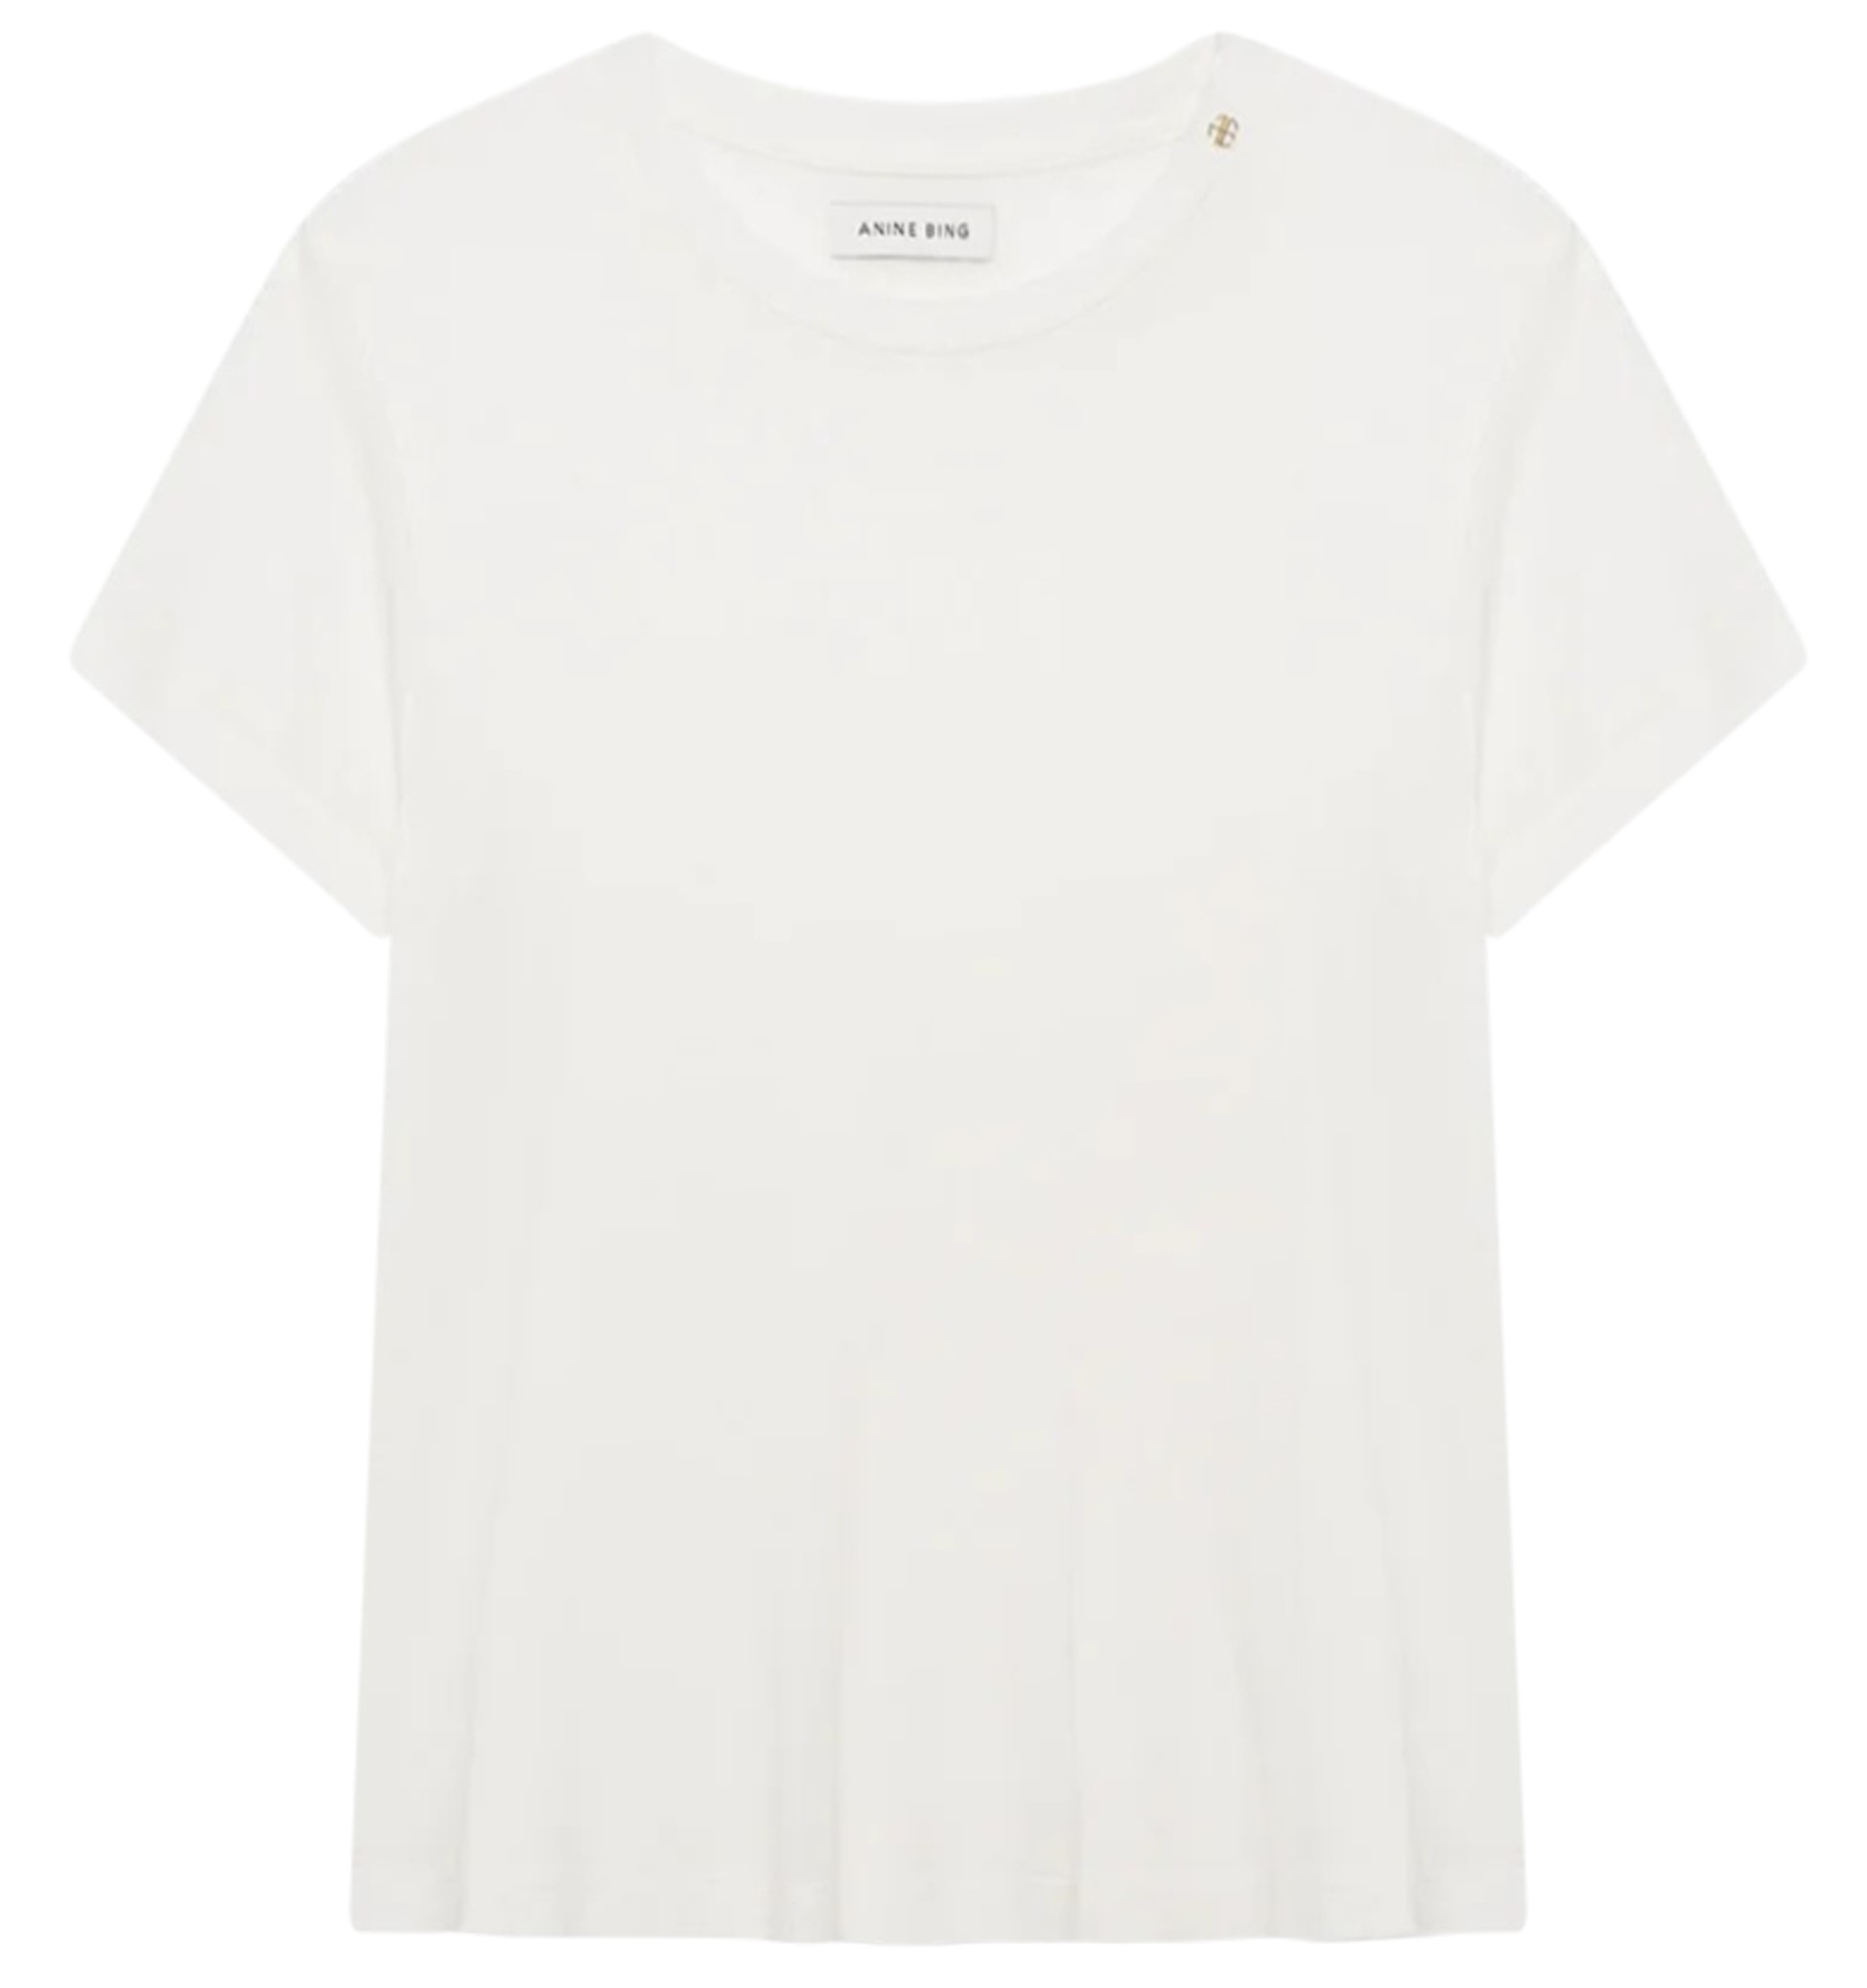 ANINE BING Amani Cashmere Blend Tee in Off White M